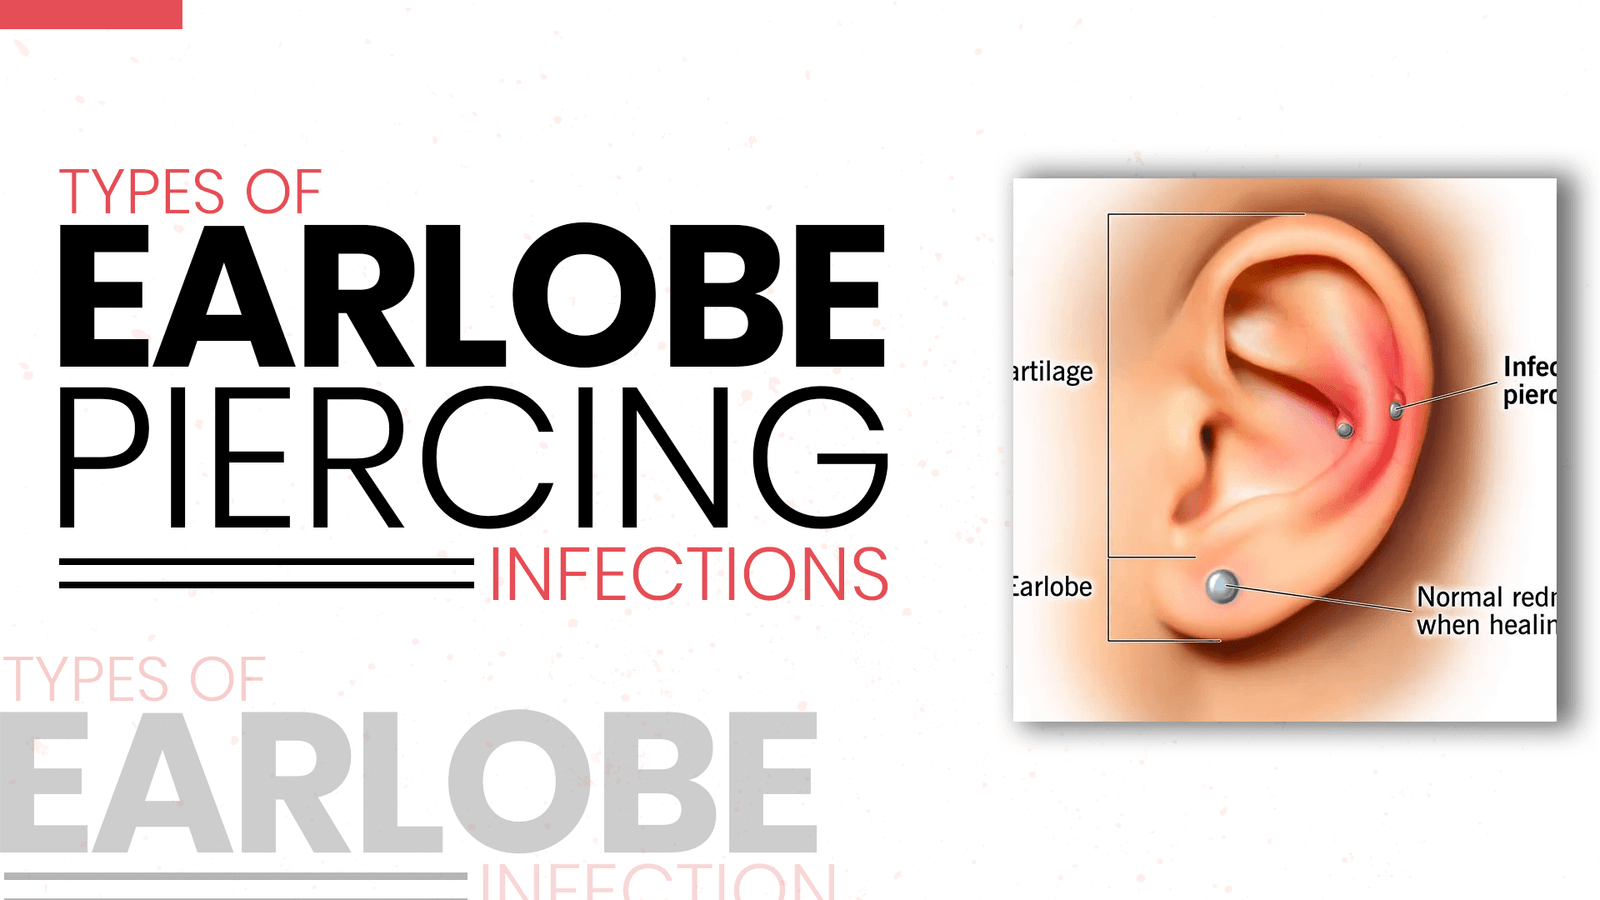 Types-of-Earlobe-Piercing-Infections